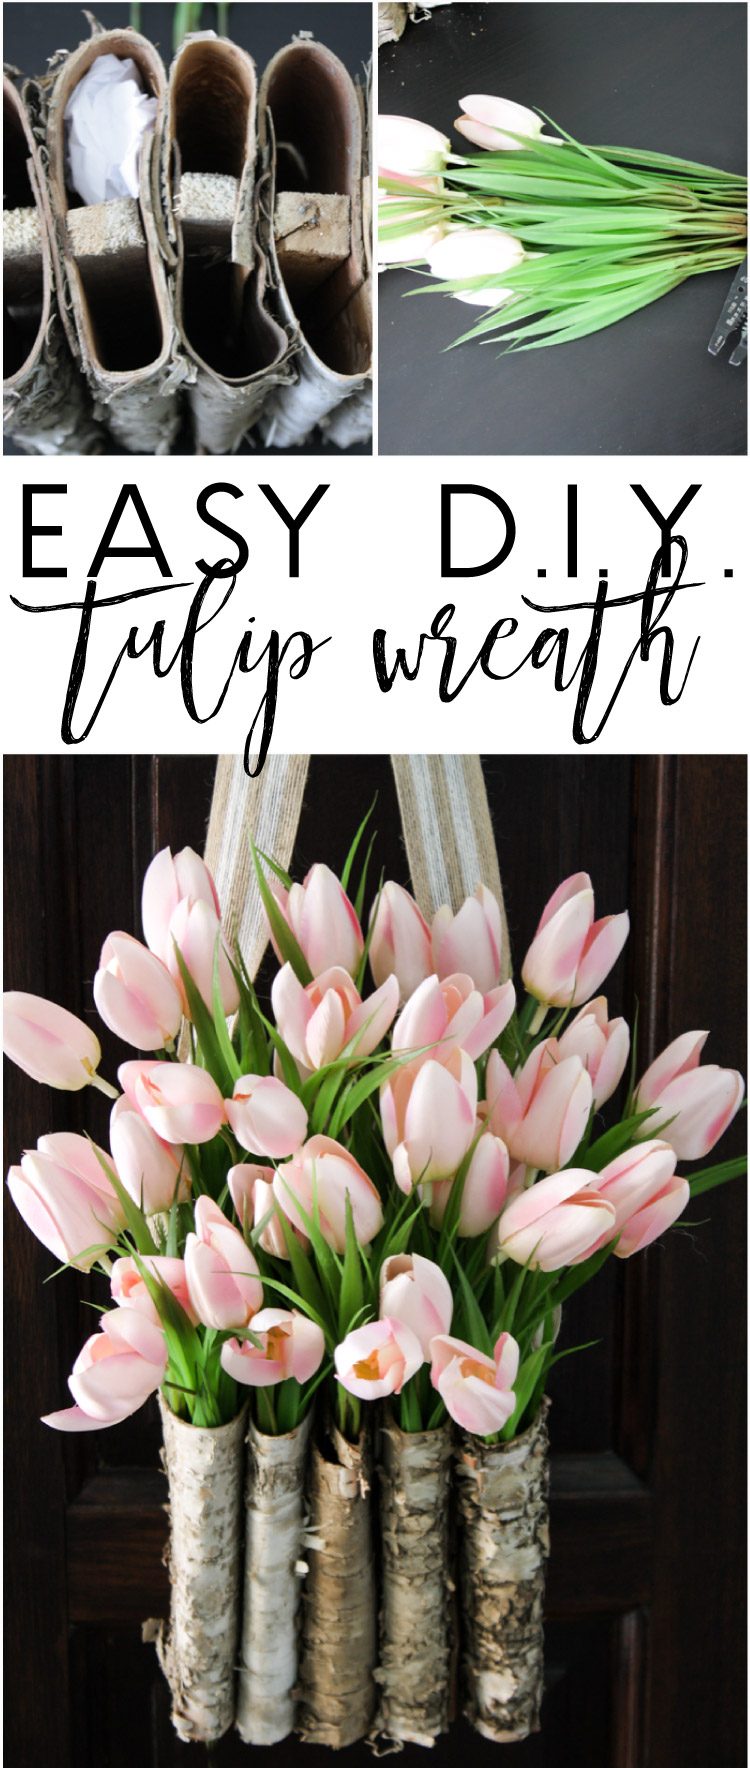 This is STUNNING! Learn to create a DIY tulip wreath with this full tutorial. It is easy and only takes 10 minutes! Tulip door wreaths are the perfect decoration for spring. Learn how to make door wreaths with this simple and fun tulip wreath tutorial!